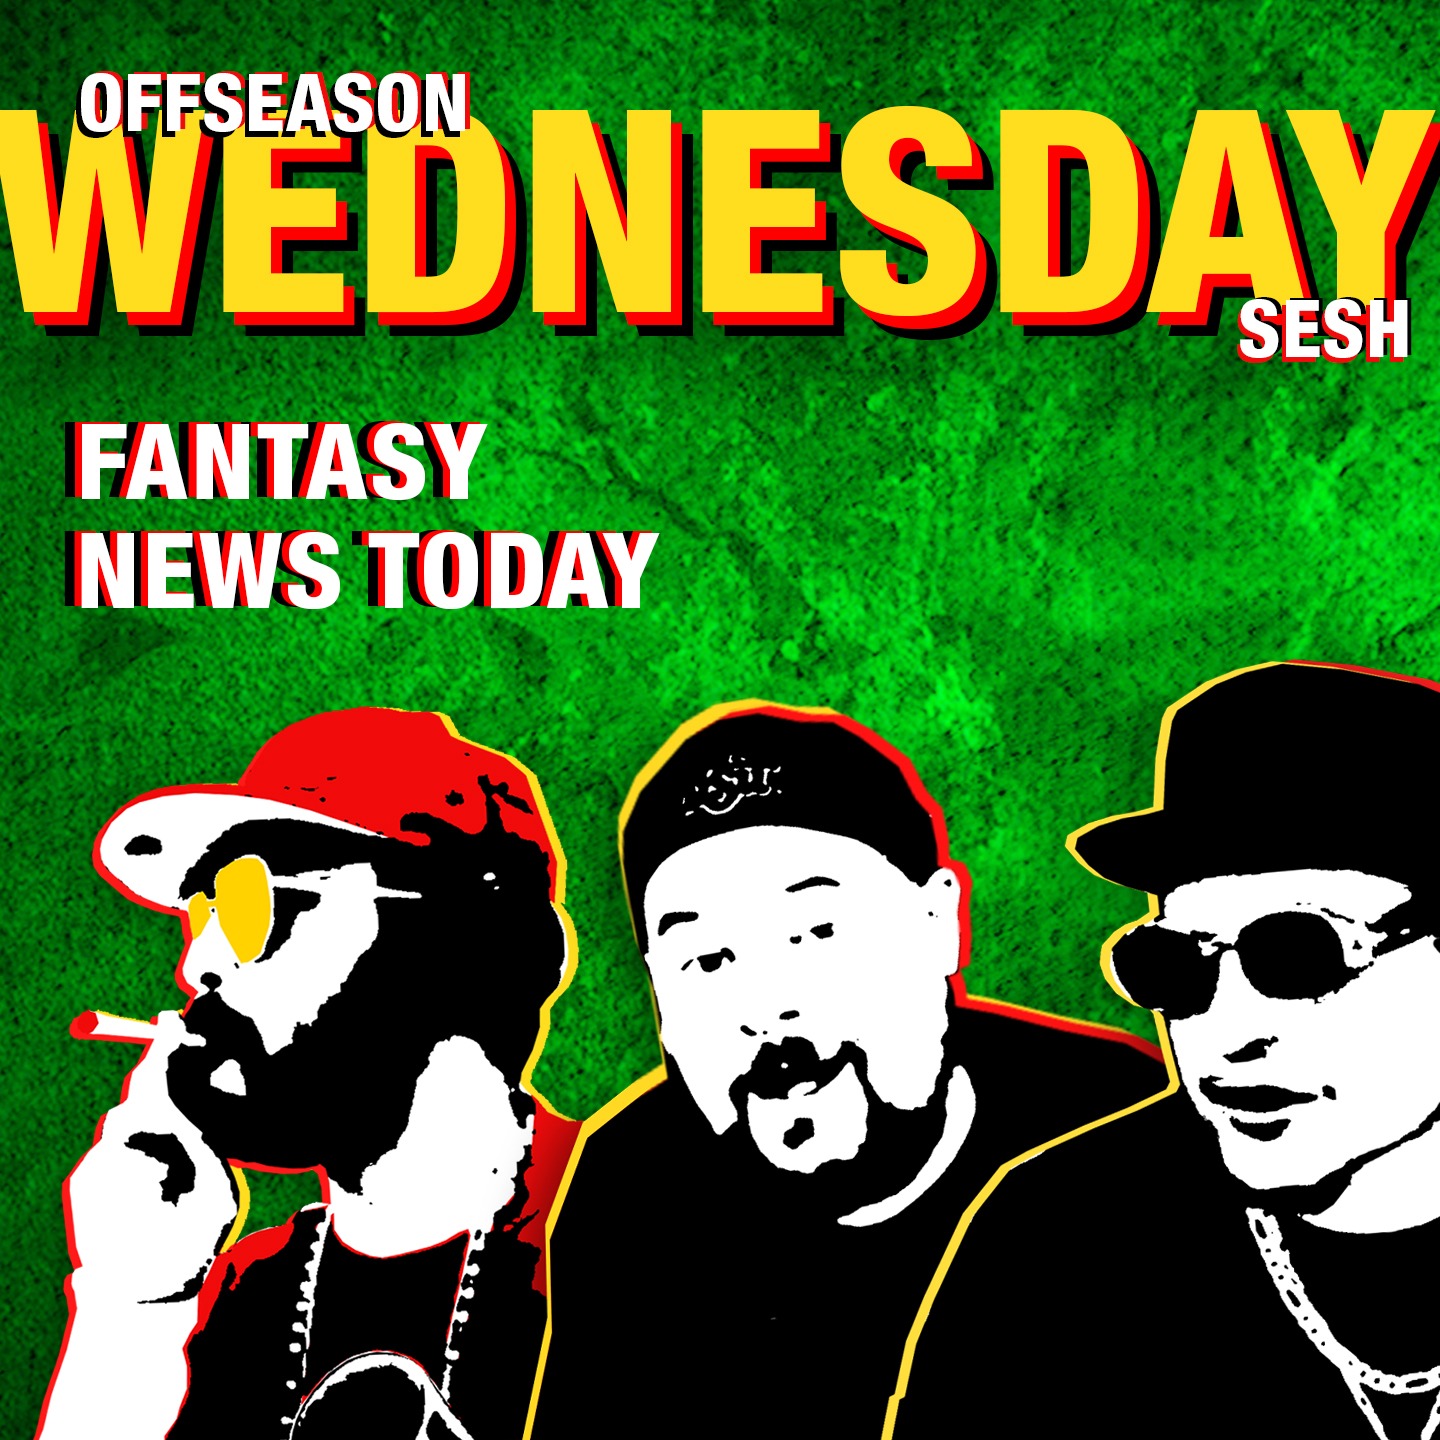 Fantasy Football News Today LIVE, Wednesday March 9th Image